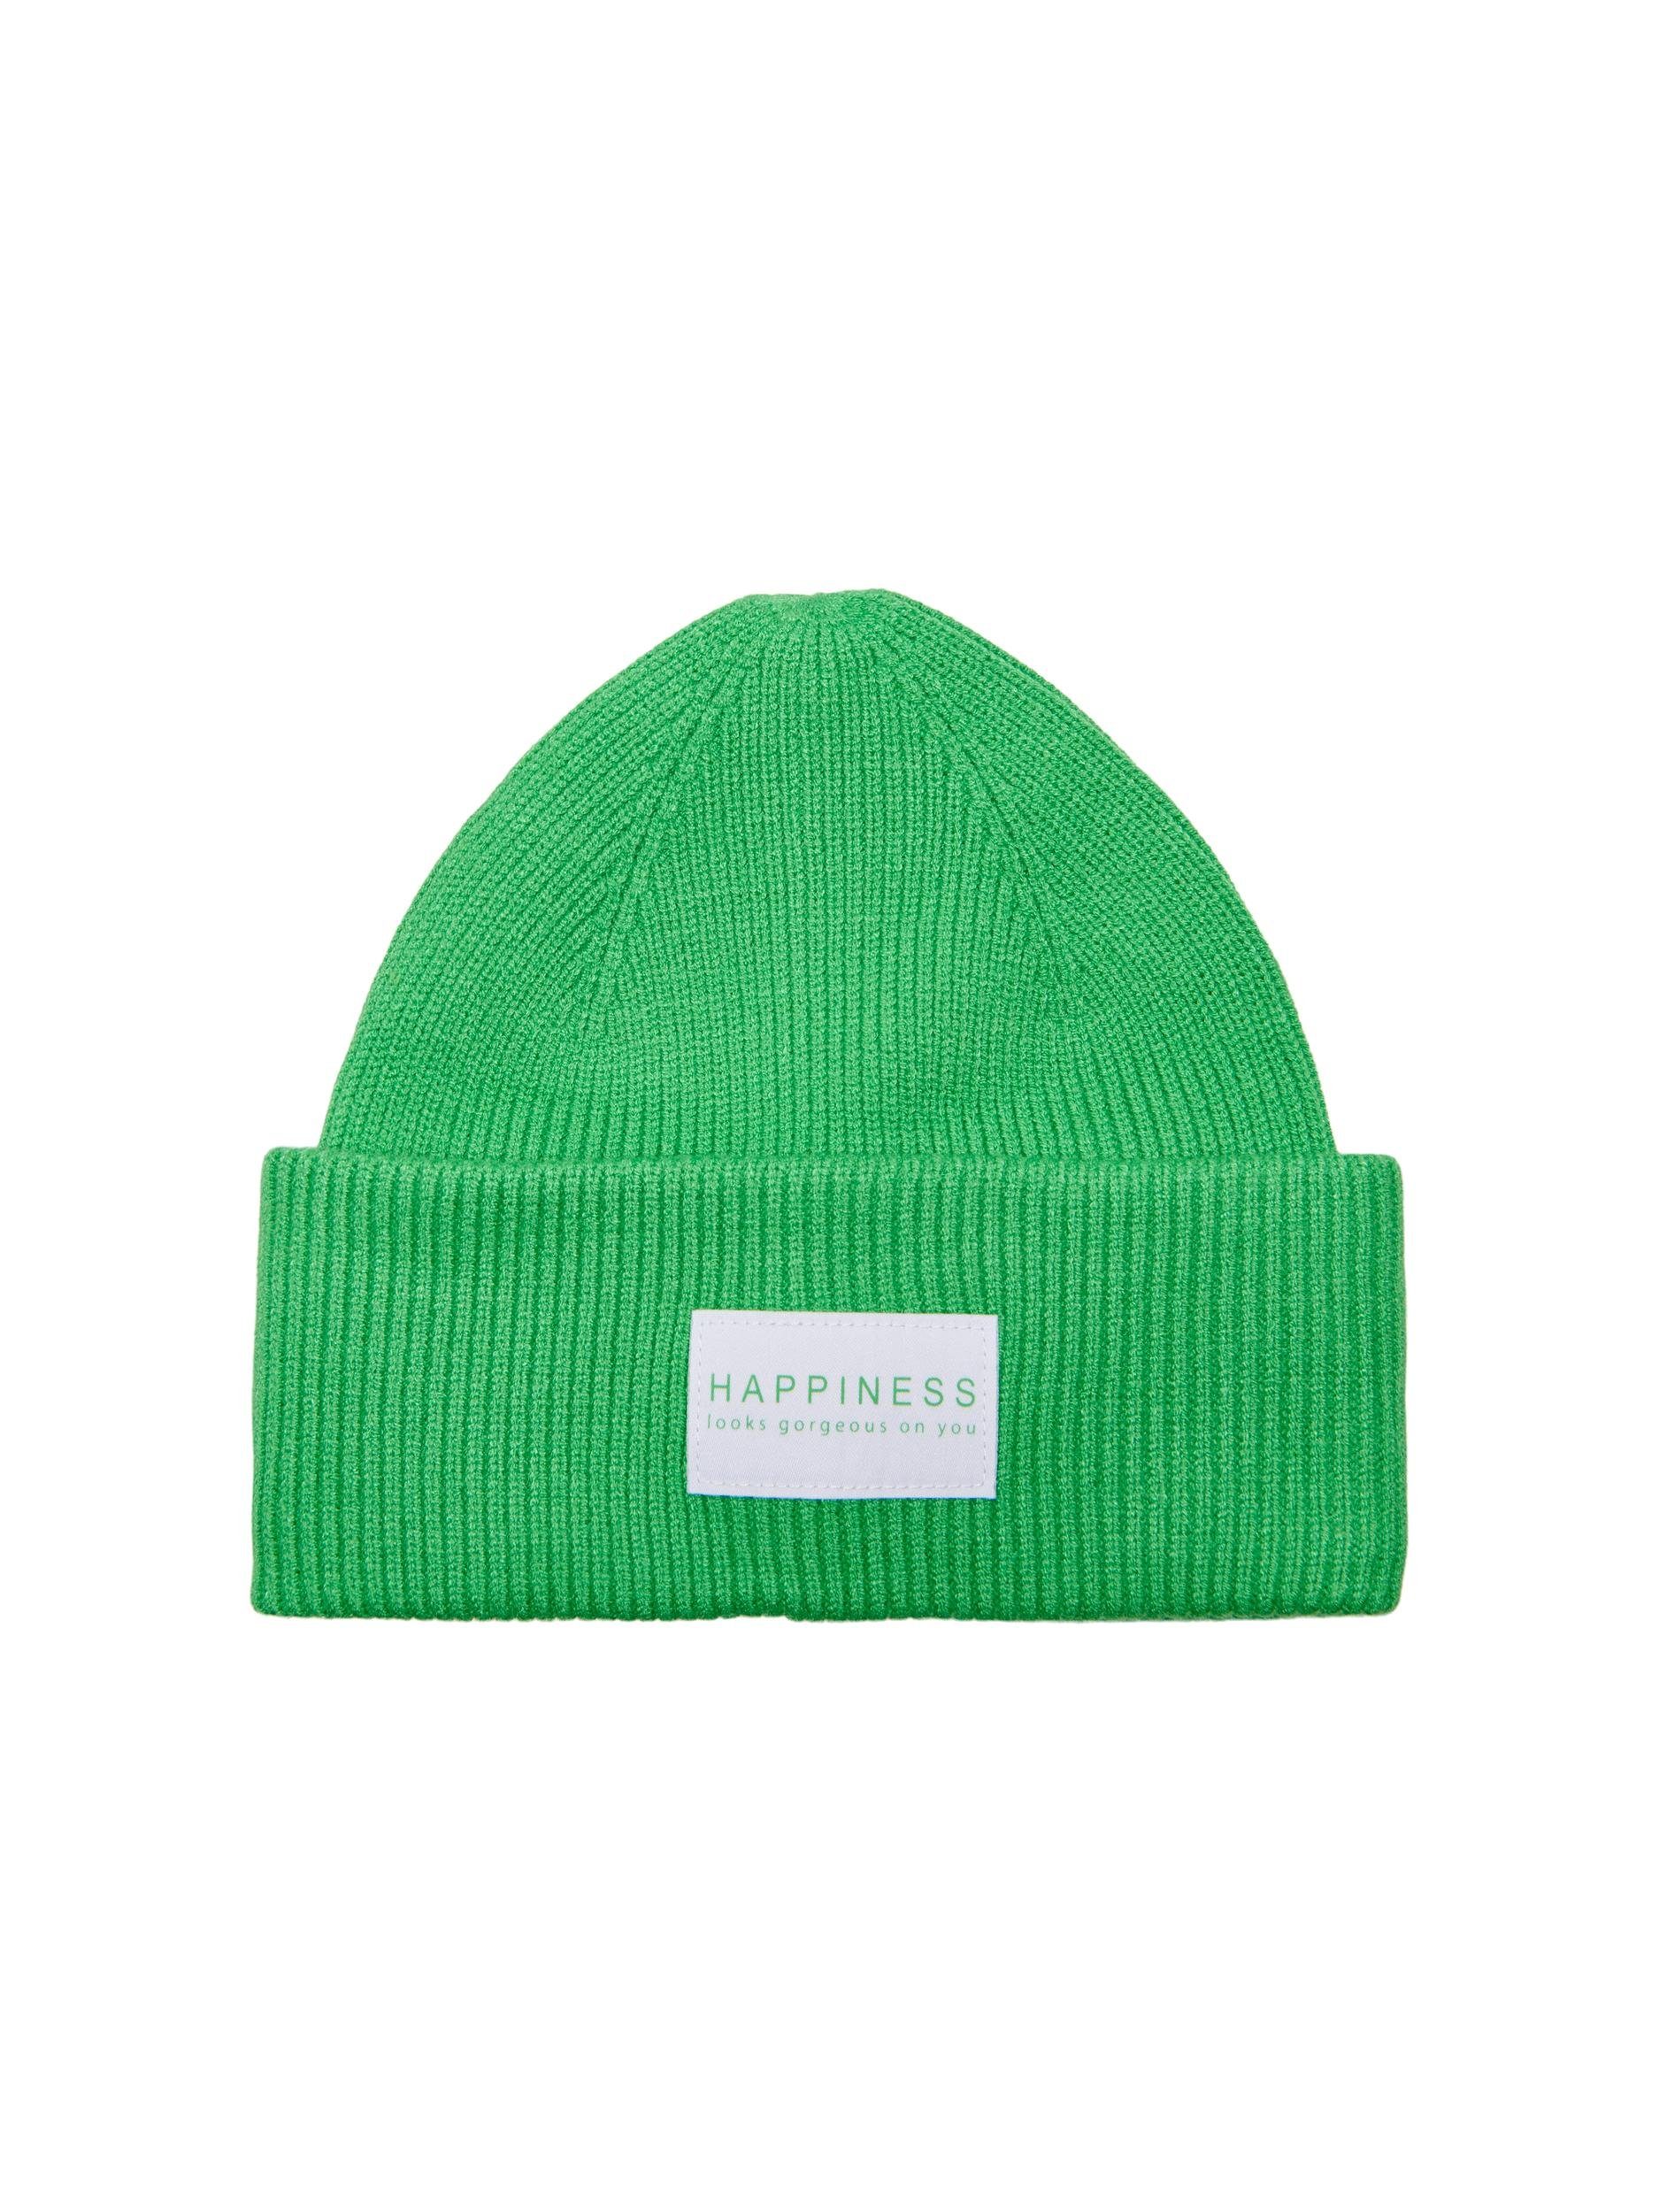 Only Eiland Groene Rib Beanie met Life Patch Green Dames